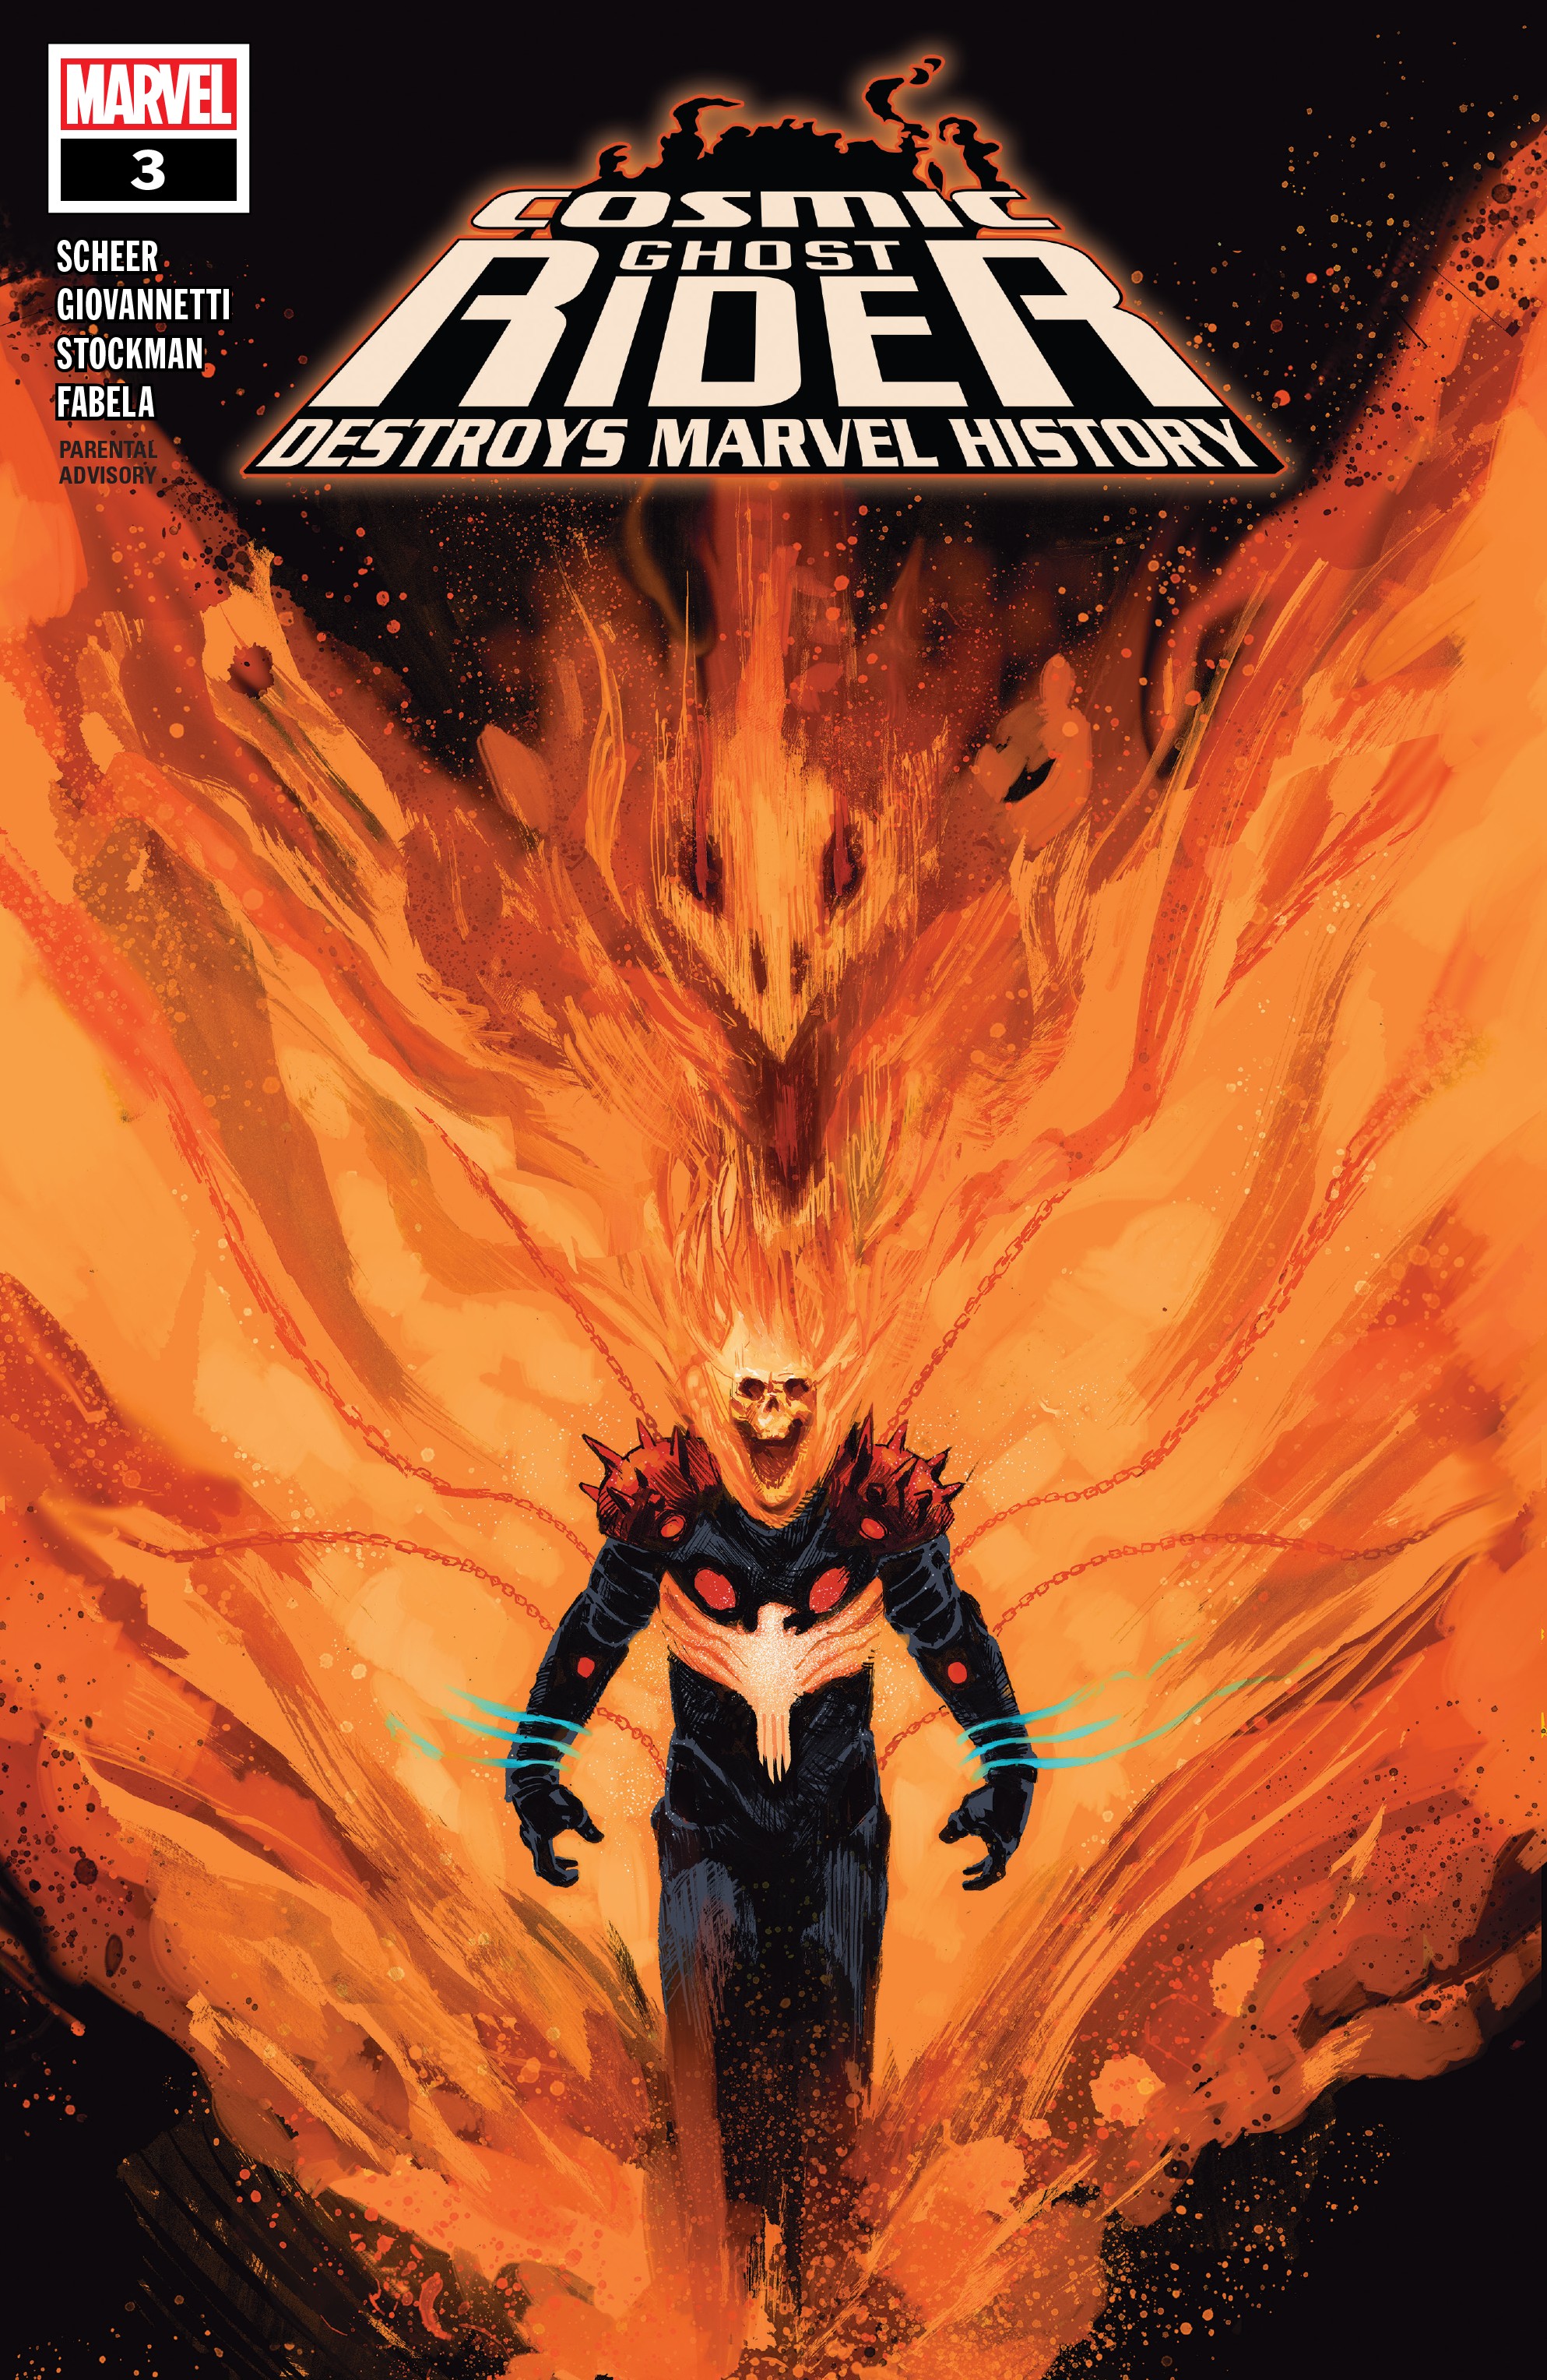 Read online Cosmic Ghost Rider Destroys Marvel History comic -  Issue #3 - 1